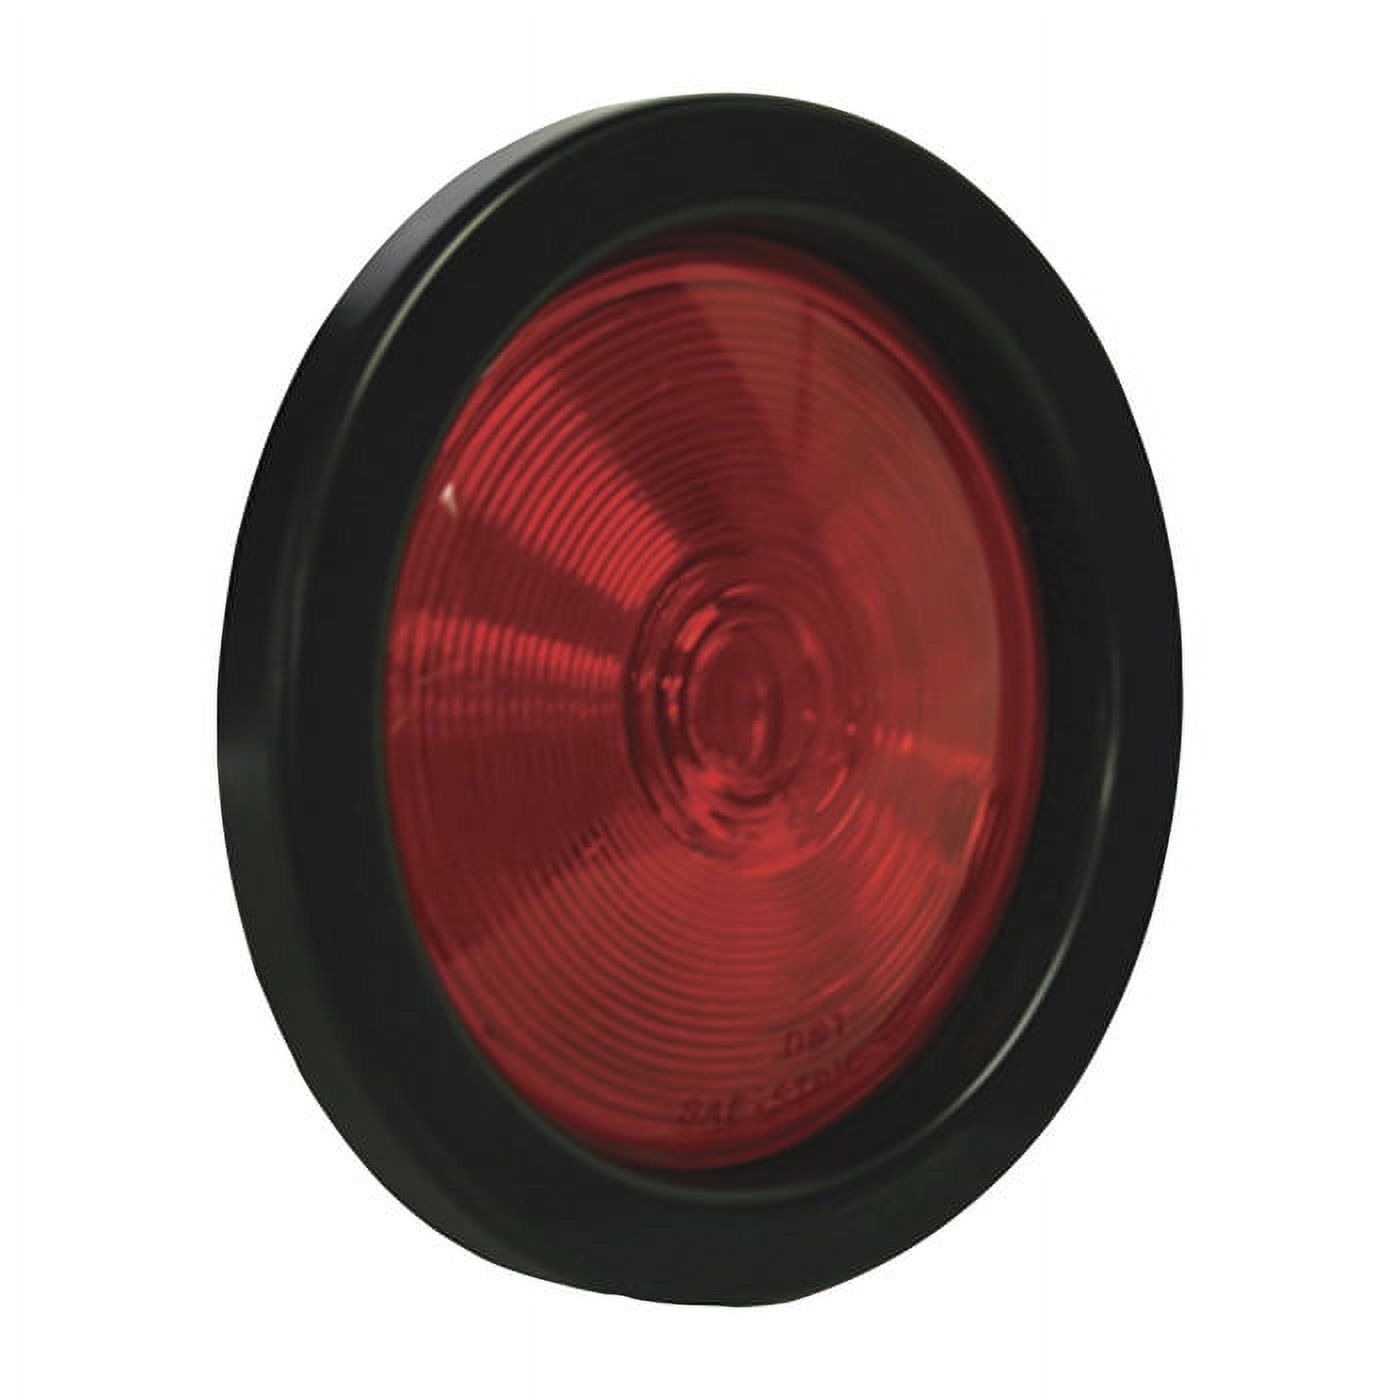 Hopkins Towing Solutions T95BR 4in. Sealed Round Stop/Tail/Turn Light, Red - image 2 of 2